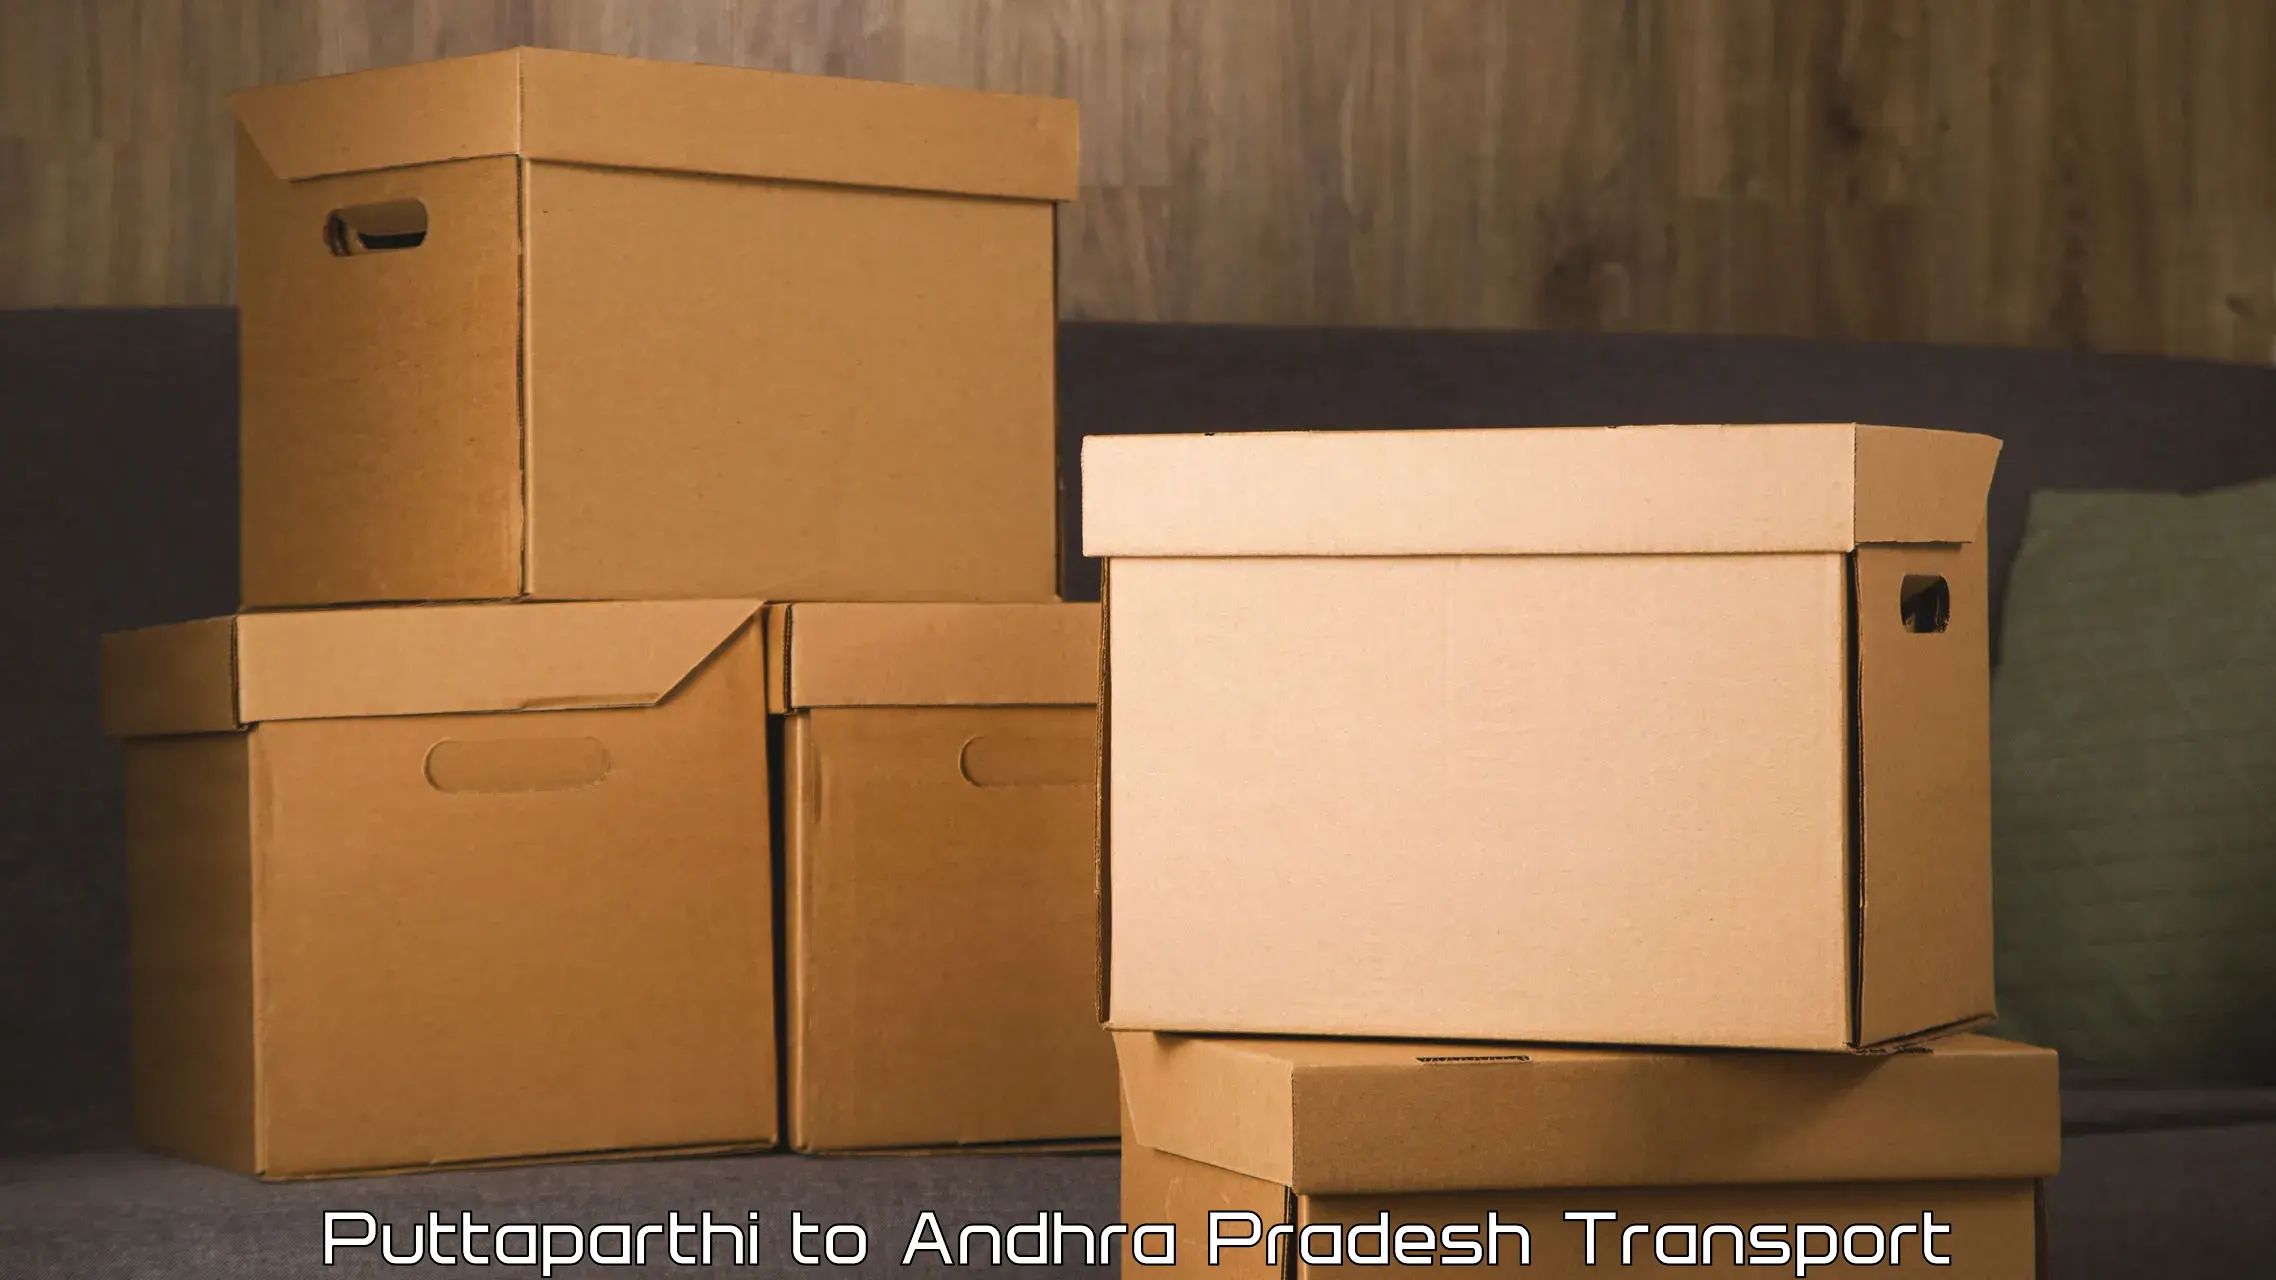 Domestic goods transportation services Puttaparthi to Chittoor